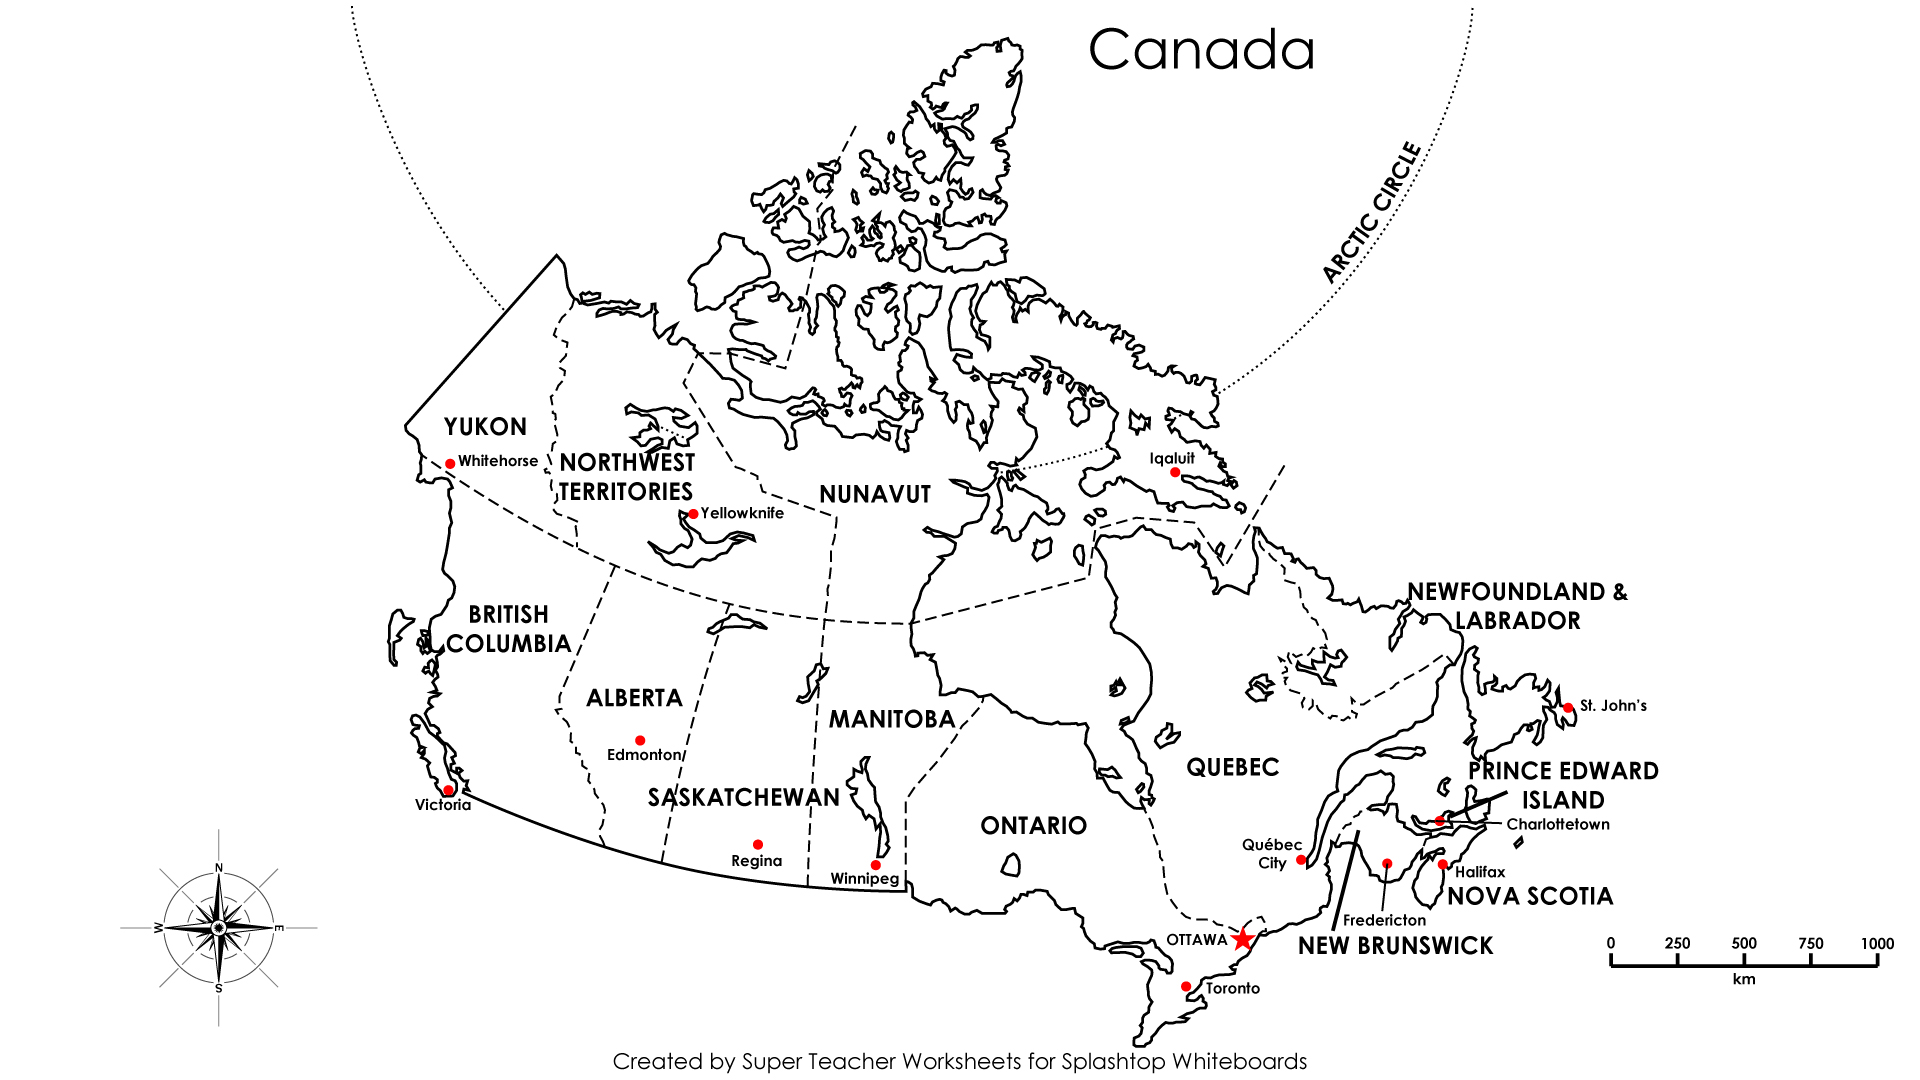 Figure 1 A state map of Canada © Pinterest created by Super Teacher Worksheets for Splashtop Whiteboards